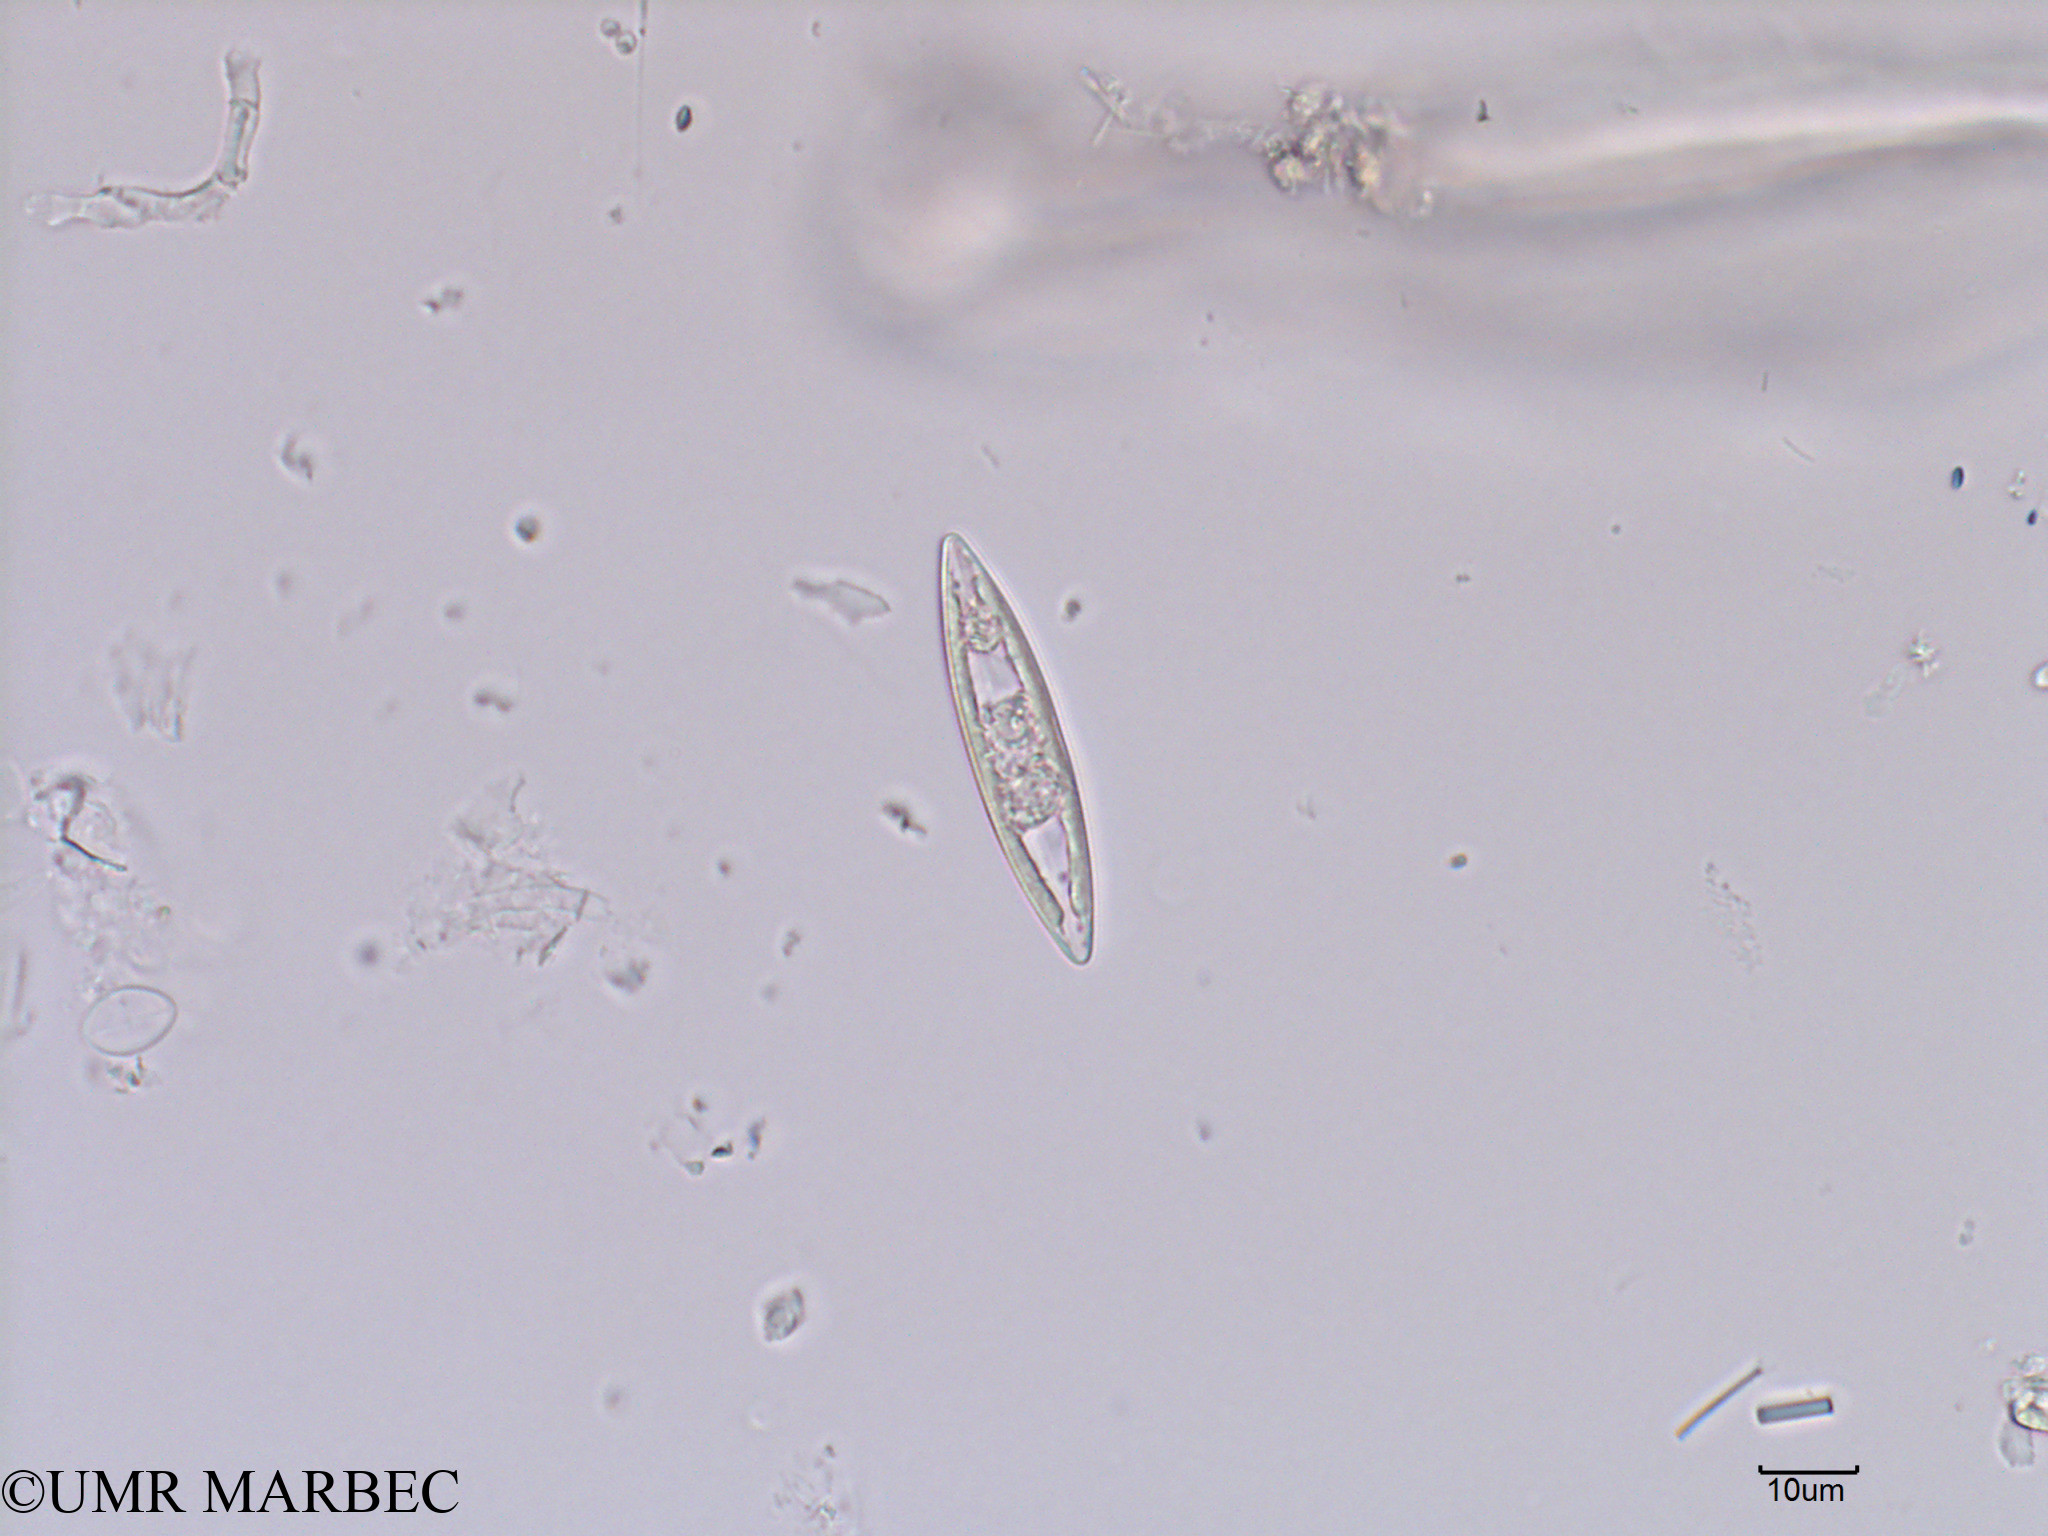 phyto/Scattered_Islands/iles_glorieuses/SIREME May 2016/Navicula sp2 (old Pennée spp 5-10x50-100µm -SIREME-Glorieuses2016-GLO5surf-191016-Pennée spp 5-10x50-100µm-10 -8)(copy).jpg